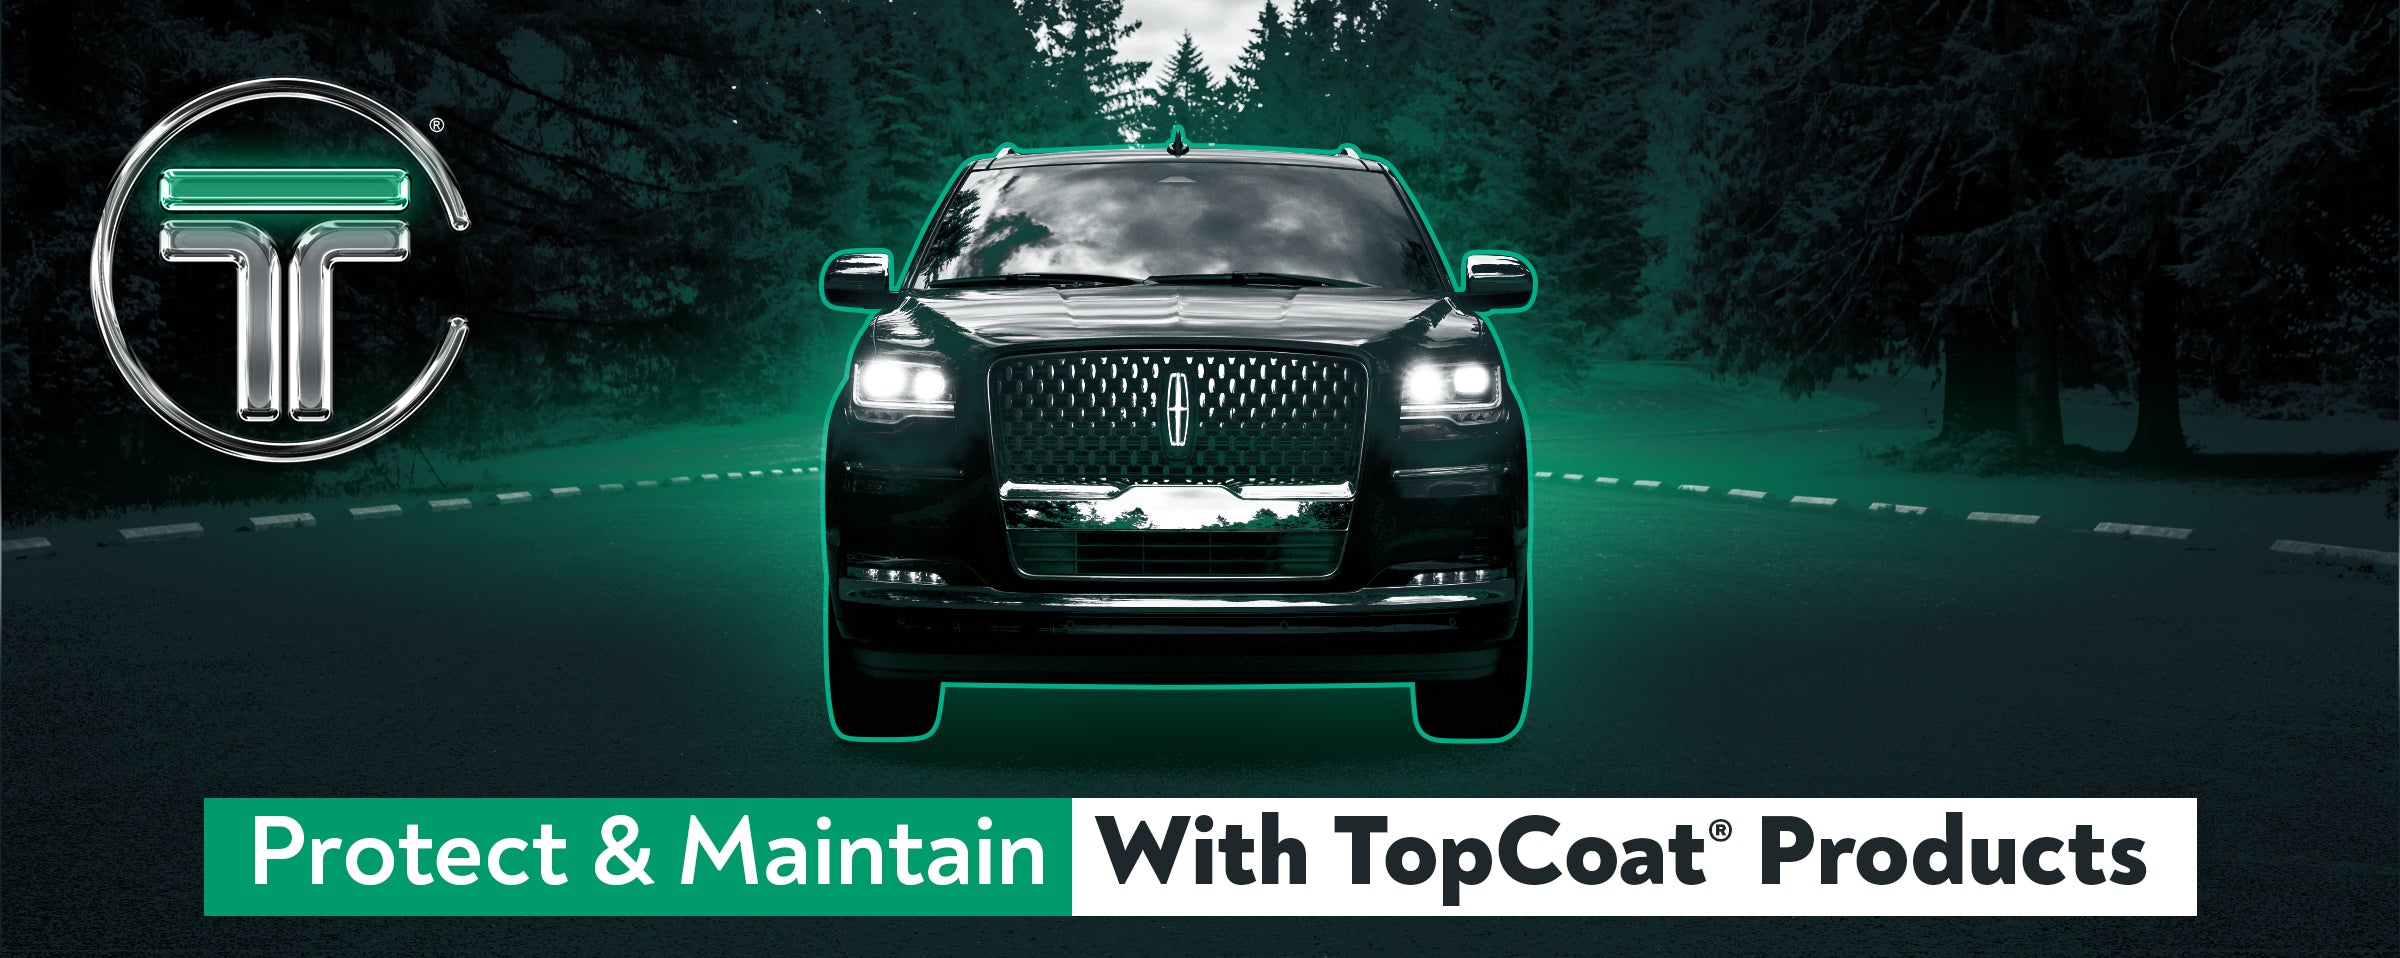 How To Protect and Maintain The Exterior Of Your Car, Truck, or SUV All Year Long with TopCoat® Products